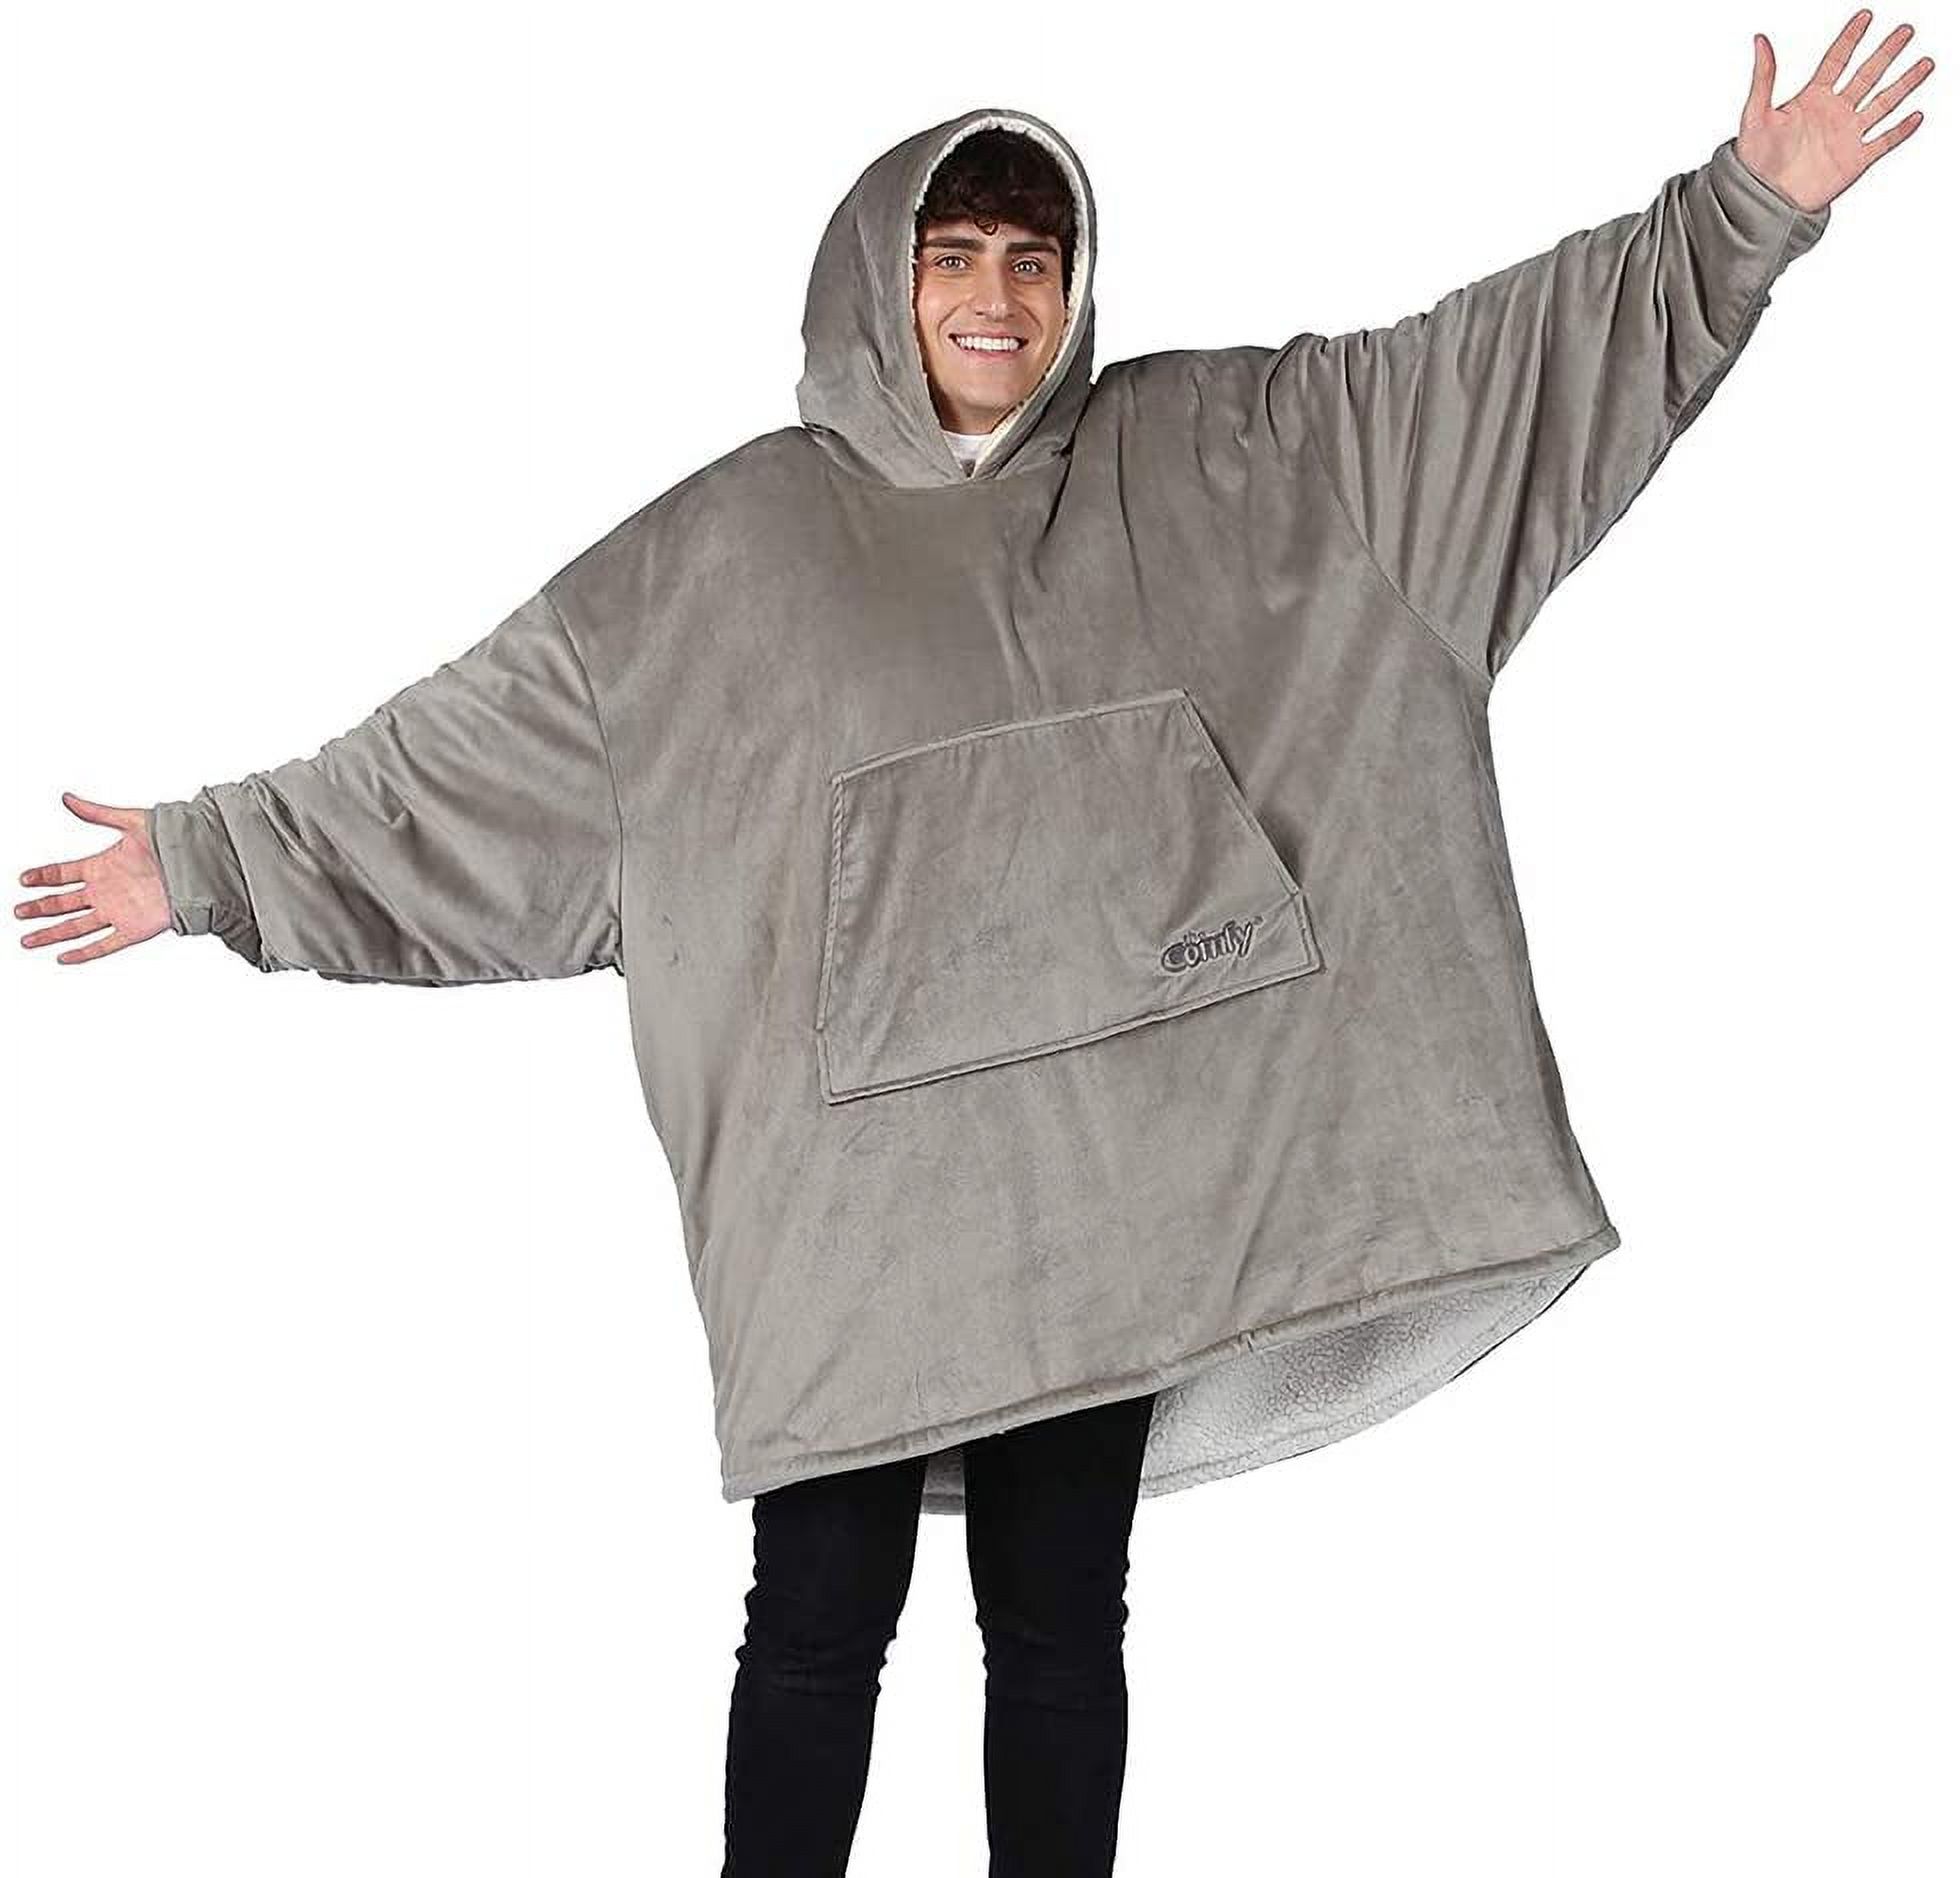 The Comfy Original Oversized Microfiber Wearable Blanket for Adults, Grey - image 3 of 5